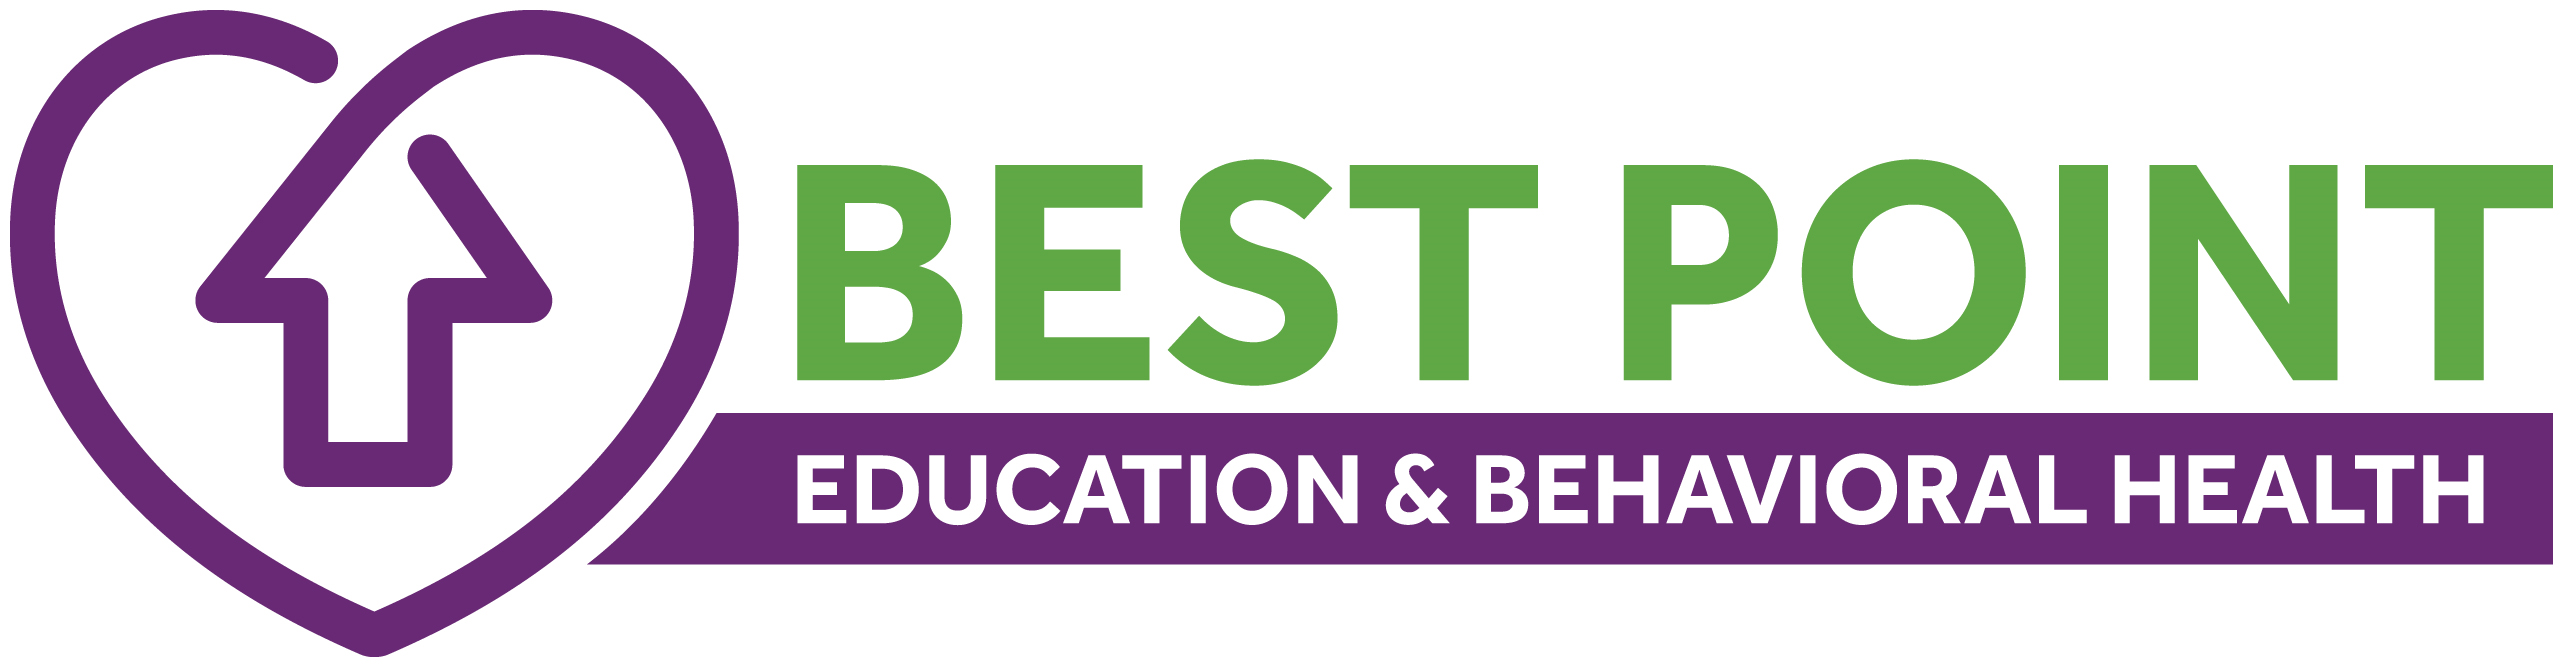 Best Point Education and Behavioral Health logo